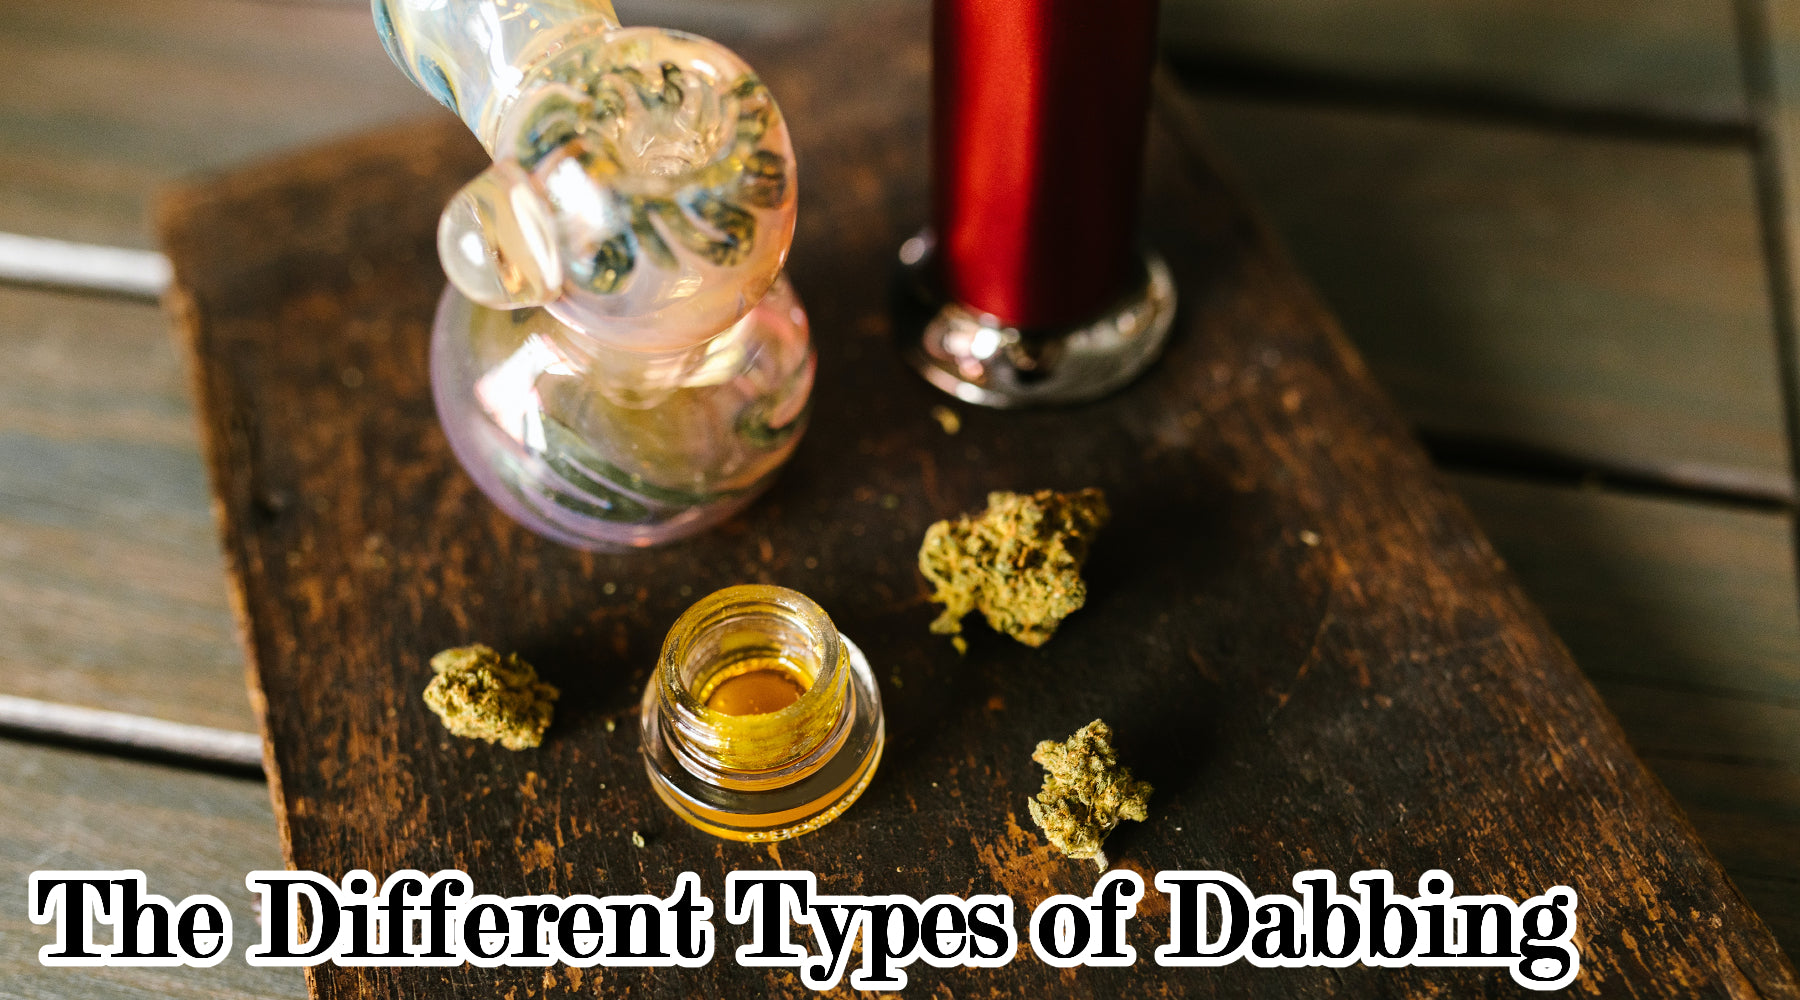 The Different Types of Dabbing